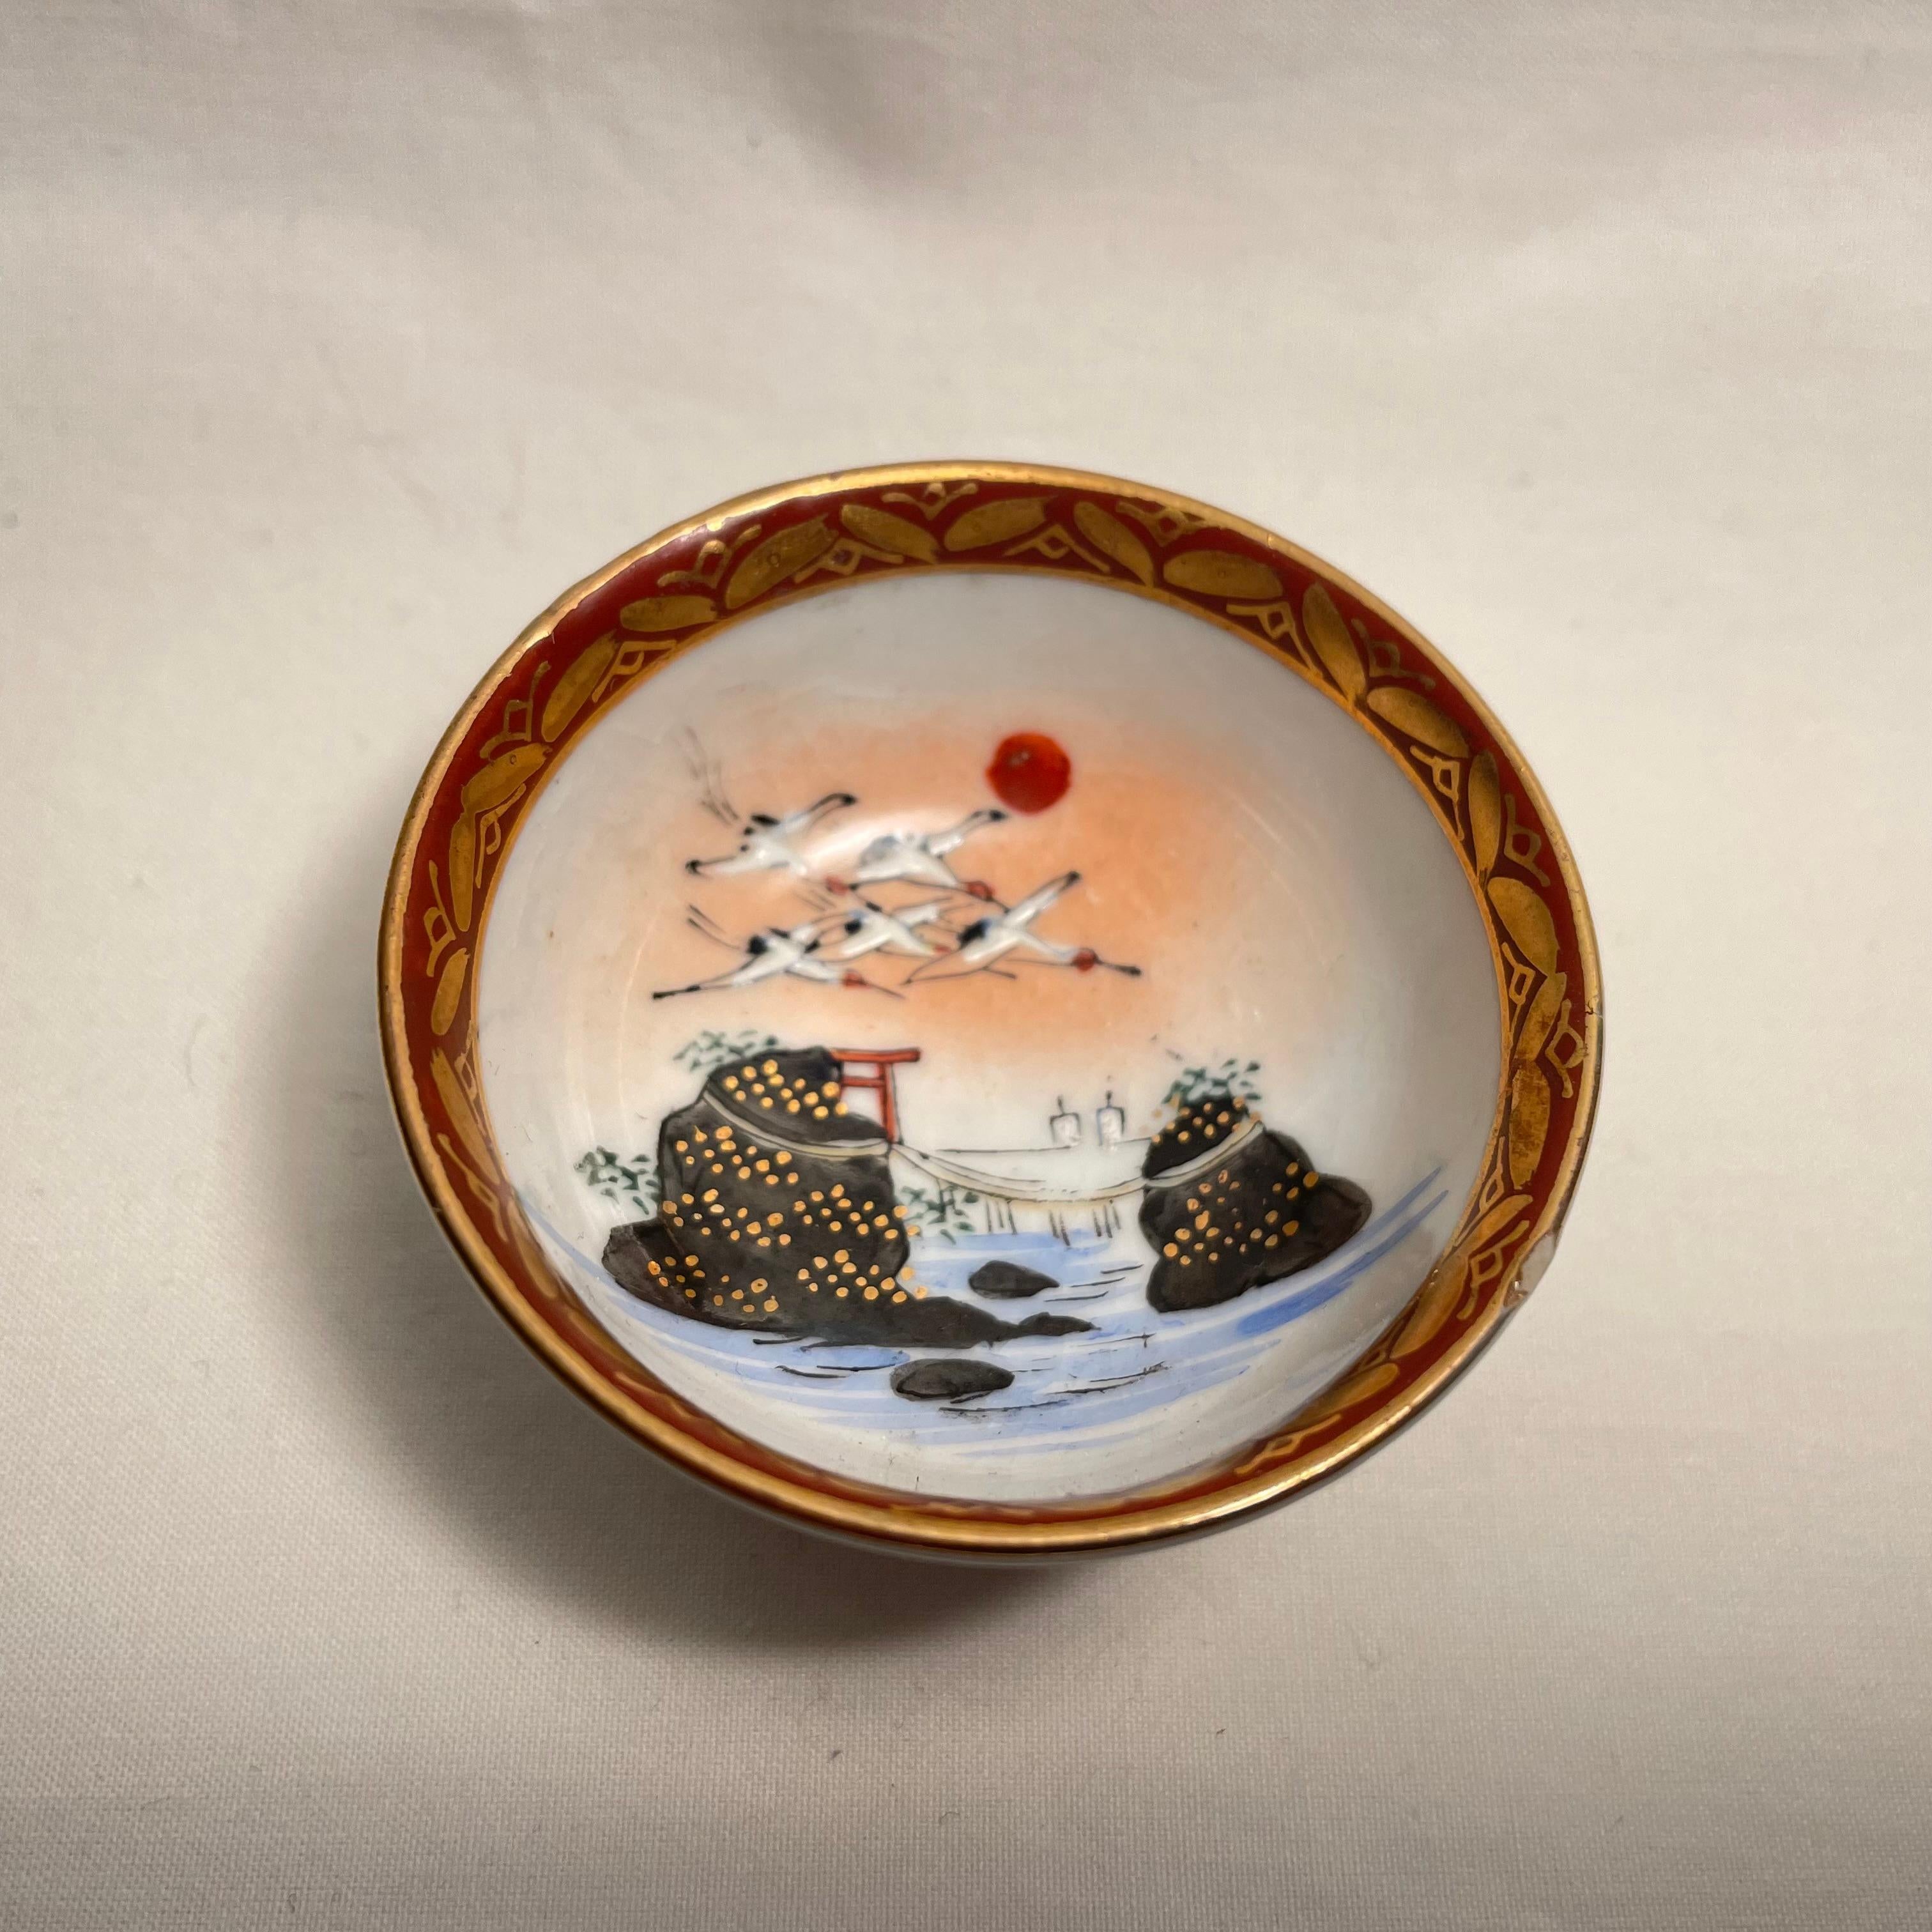 This is a small cup for drinking sake. It is called Ochoko in Japanese.
It was made in showa era around 1960s.  It is made with porcelain and all hand painted. 
This is Kutani ware.
Design is with a paysage of ISE.

Dimensions:
5,2 x 5,2 x H2,5 cm